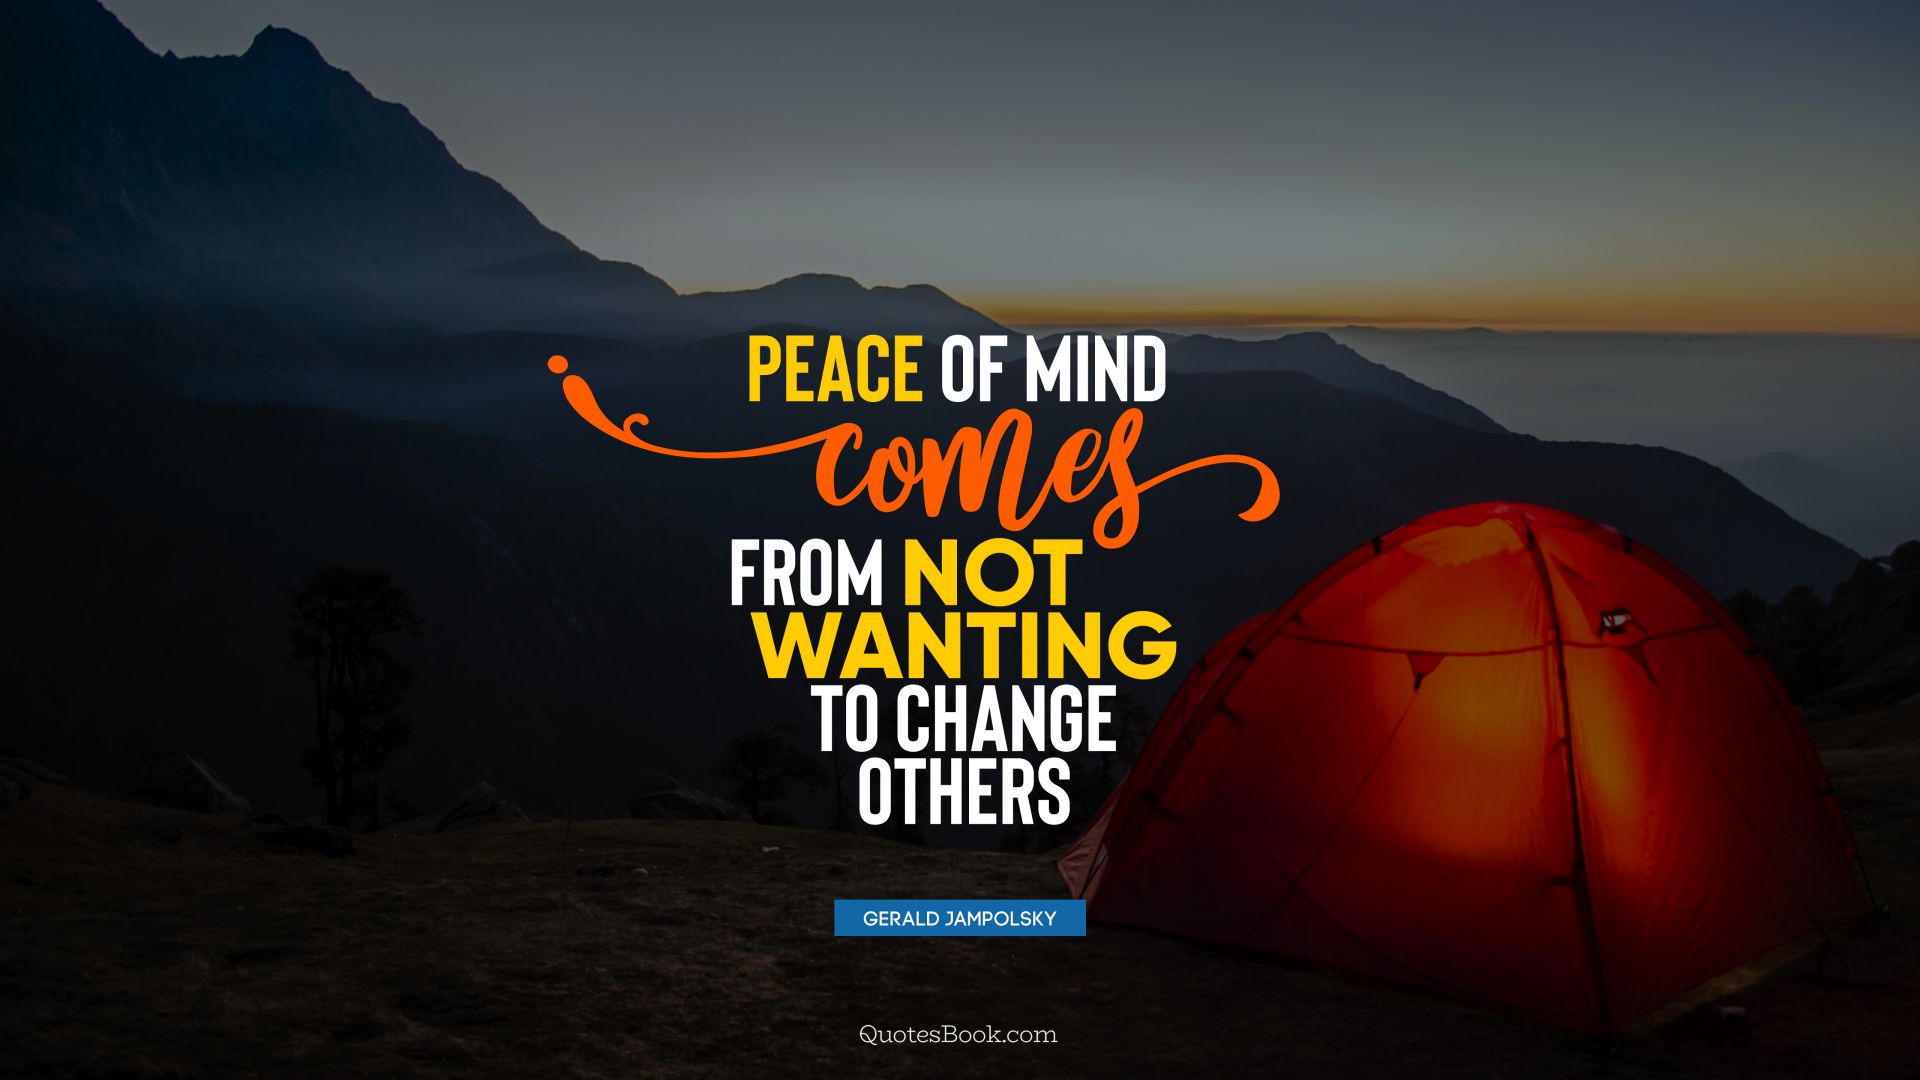 Peace of mind comes from not wanting to change others. - Quote by Gerald Jampolsky